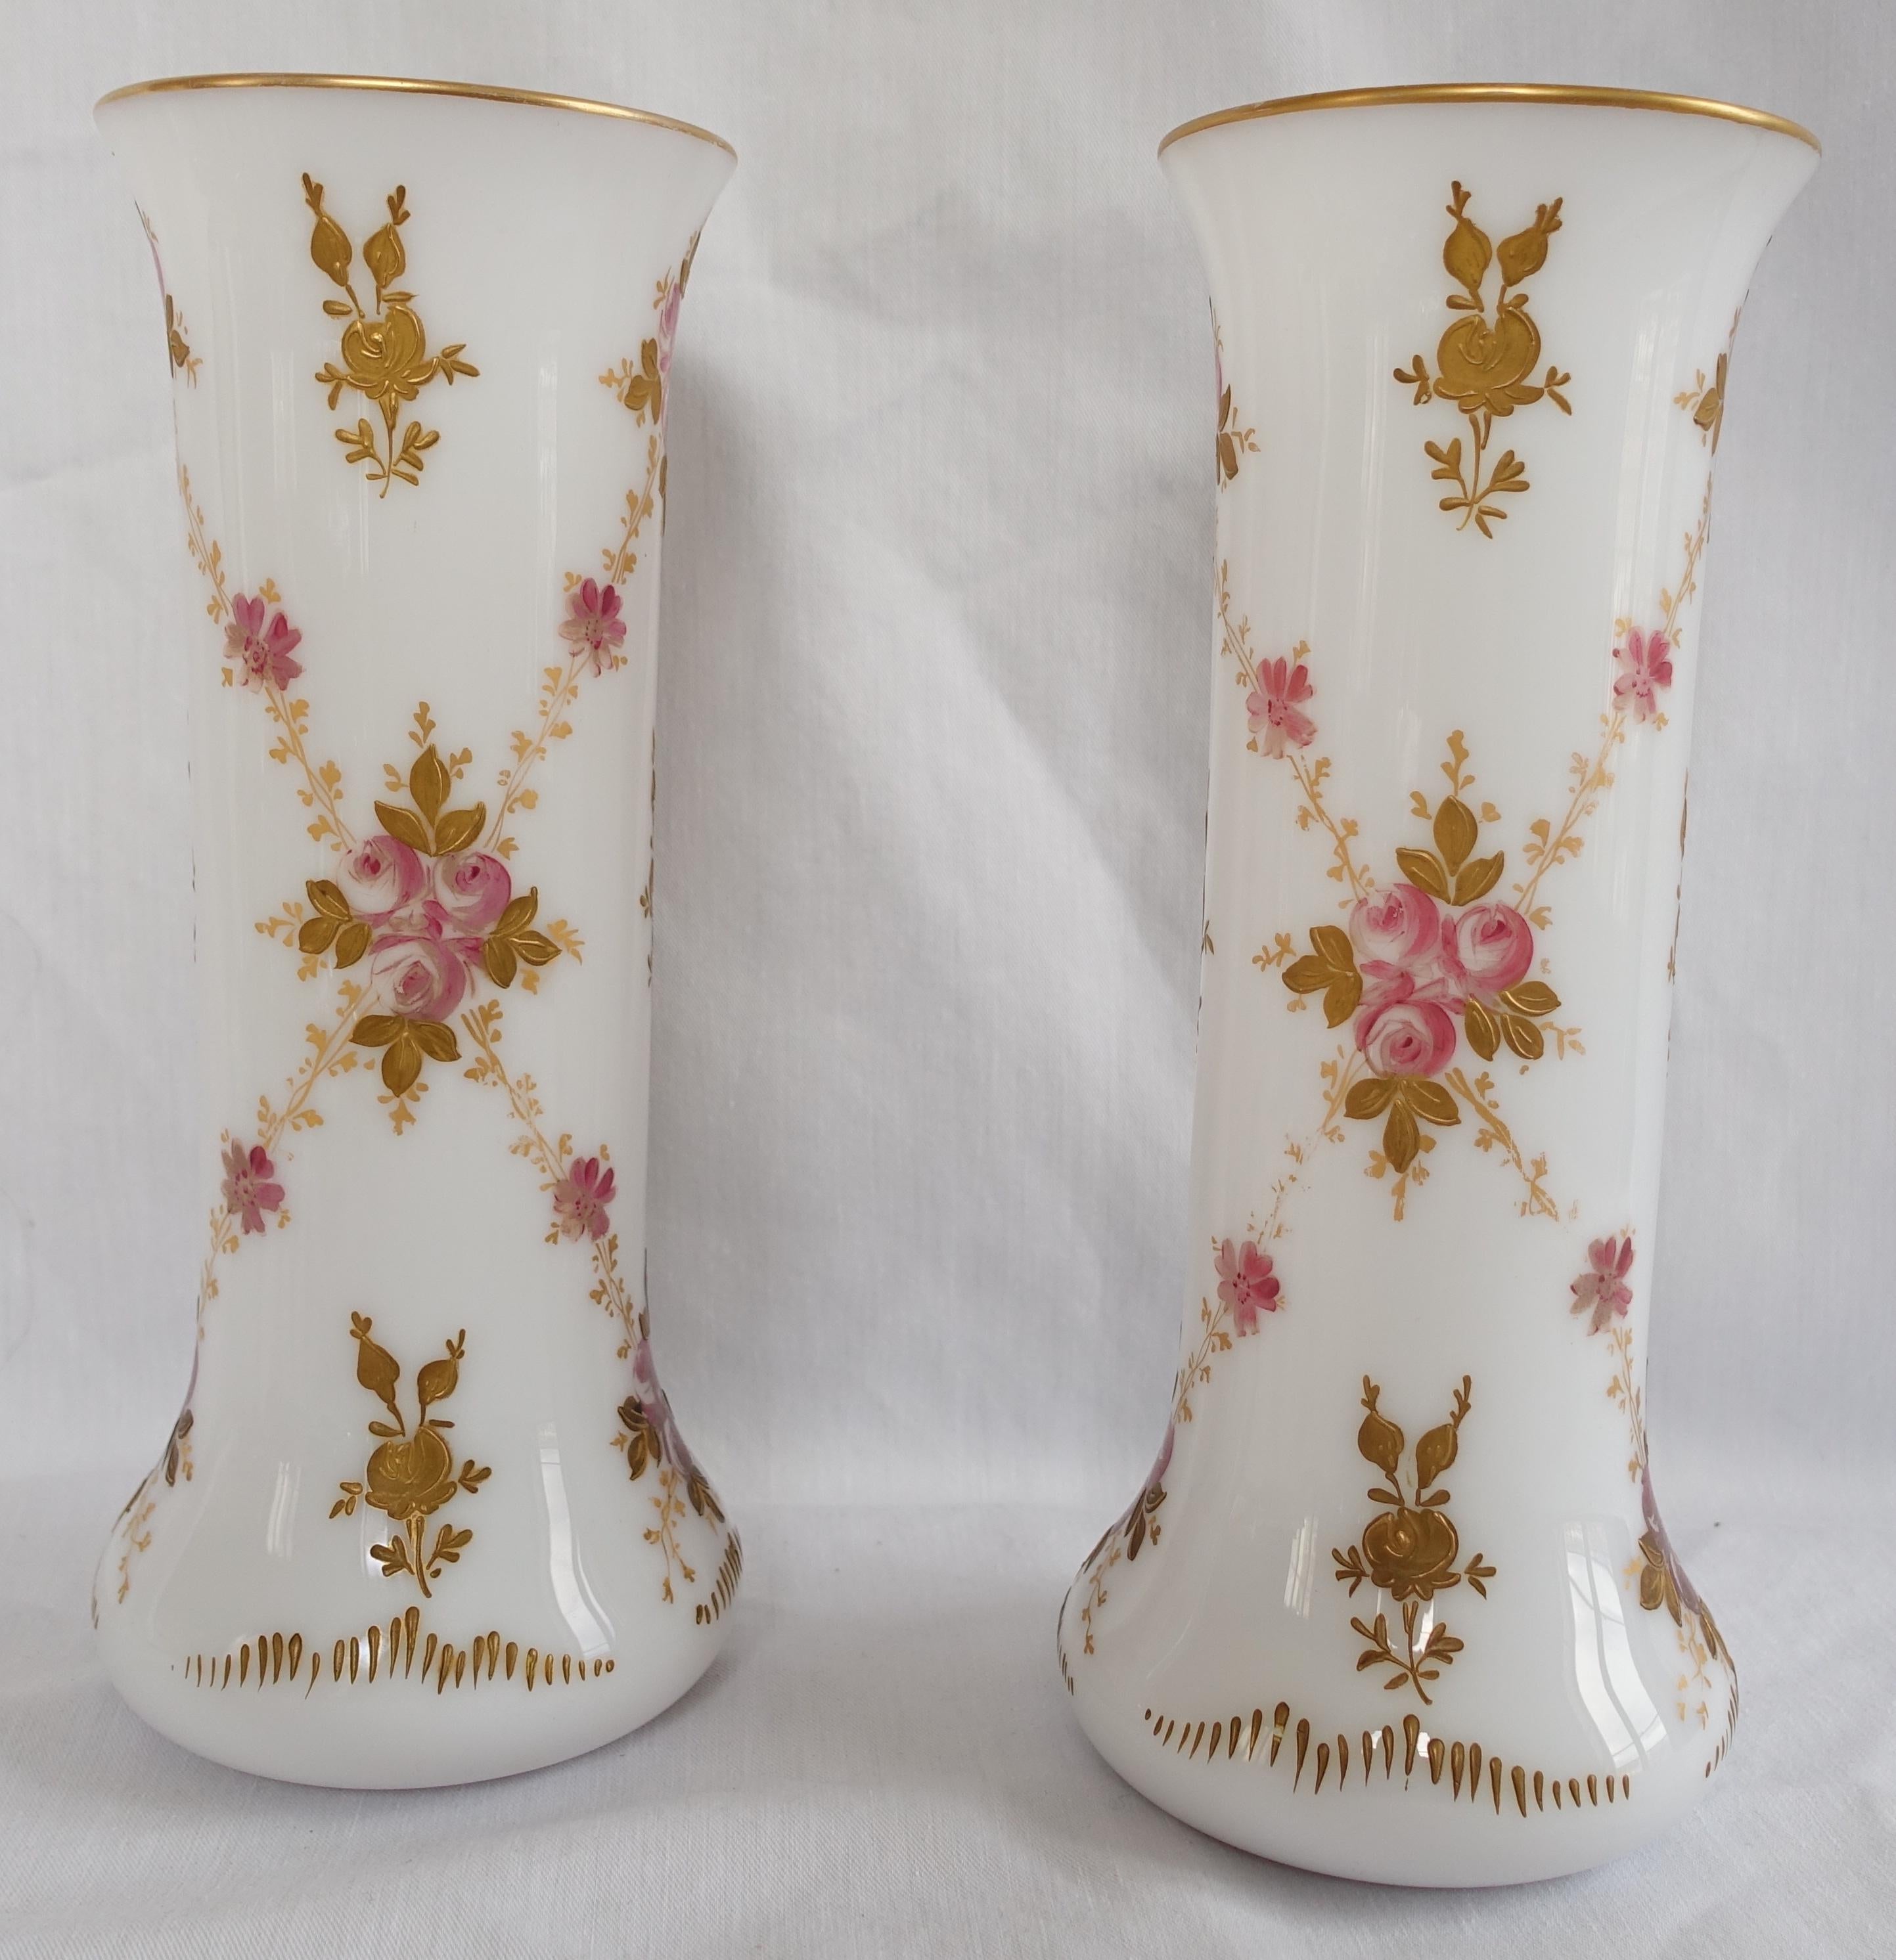 Pair of opaline crystal vases by French crystal maker St Louis.
Beautiful Napoleon III style production, late 19th century production circa 1880 - 1890.
Our vases are hand-painted and enhanced with fine gold flowers decoration (peonies).
In